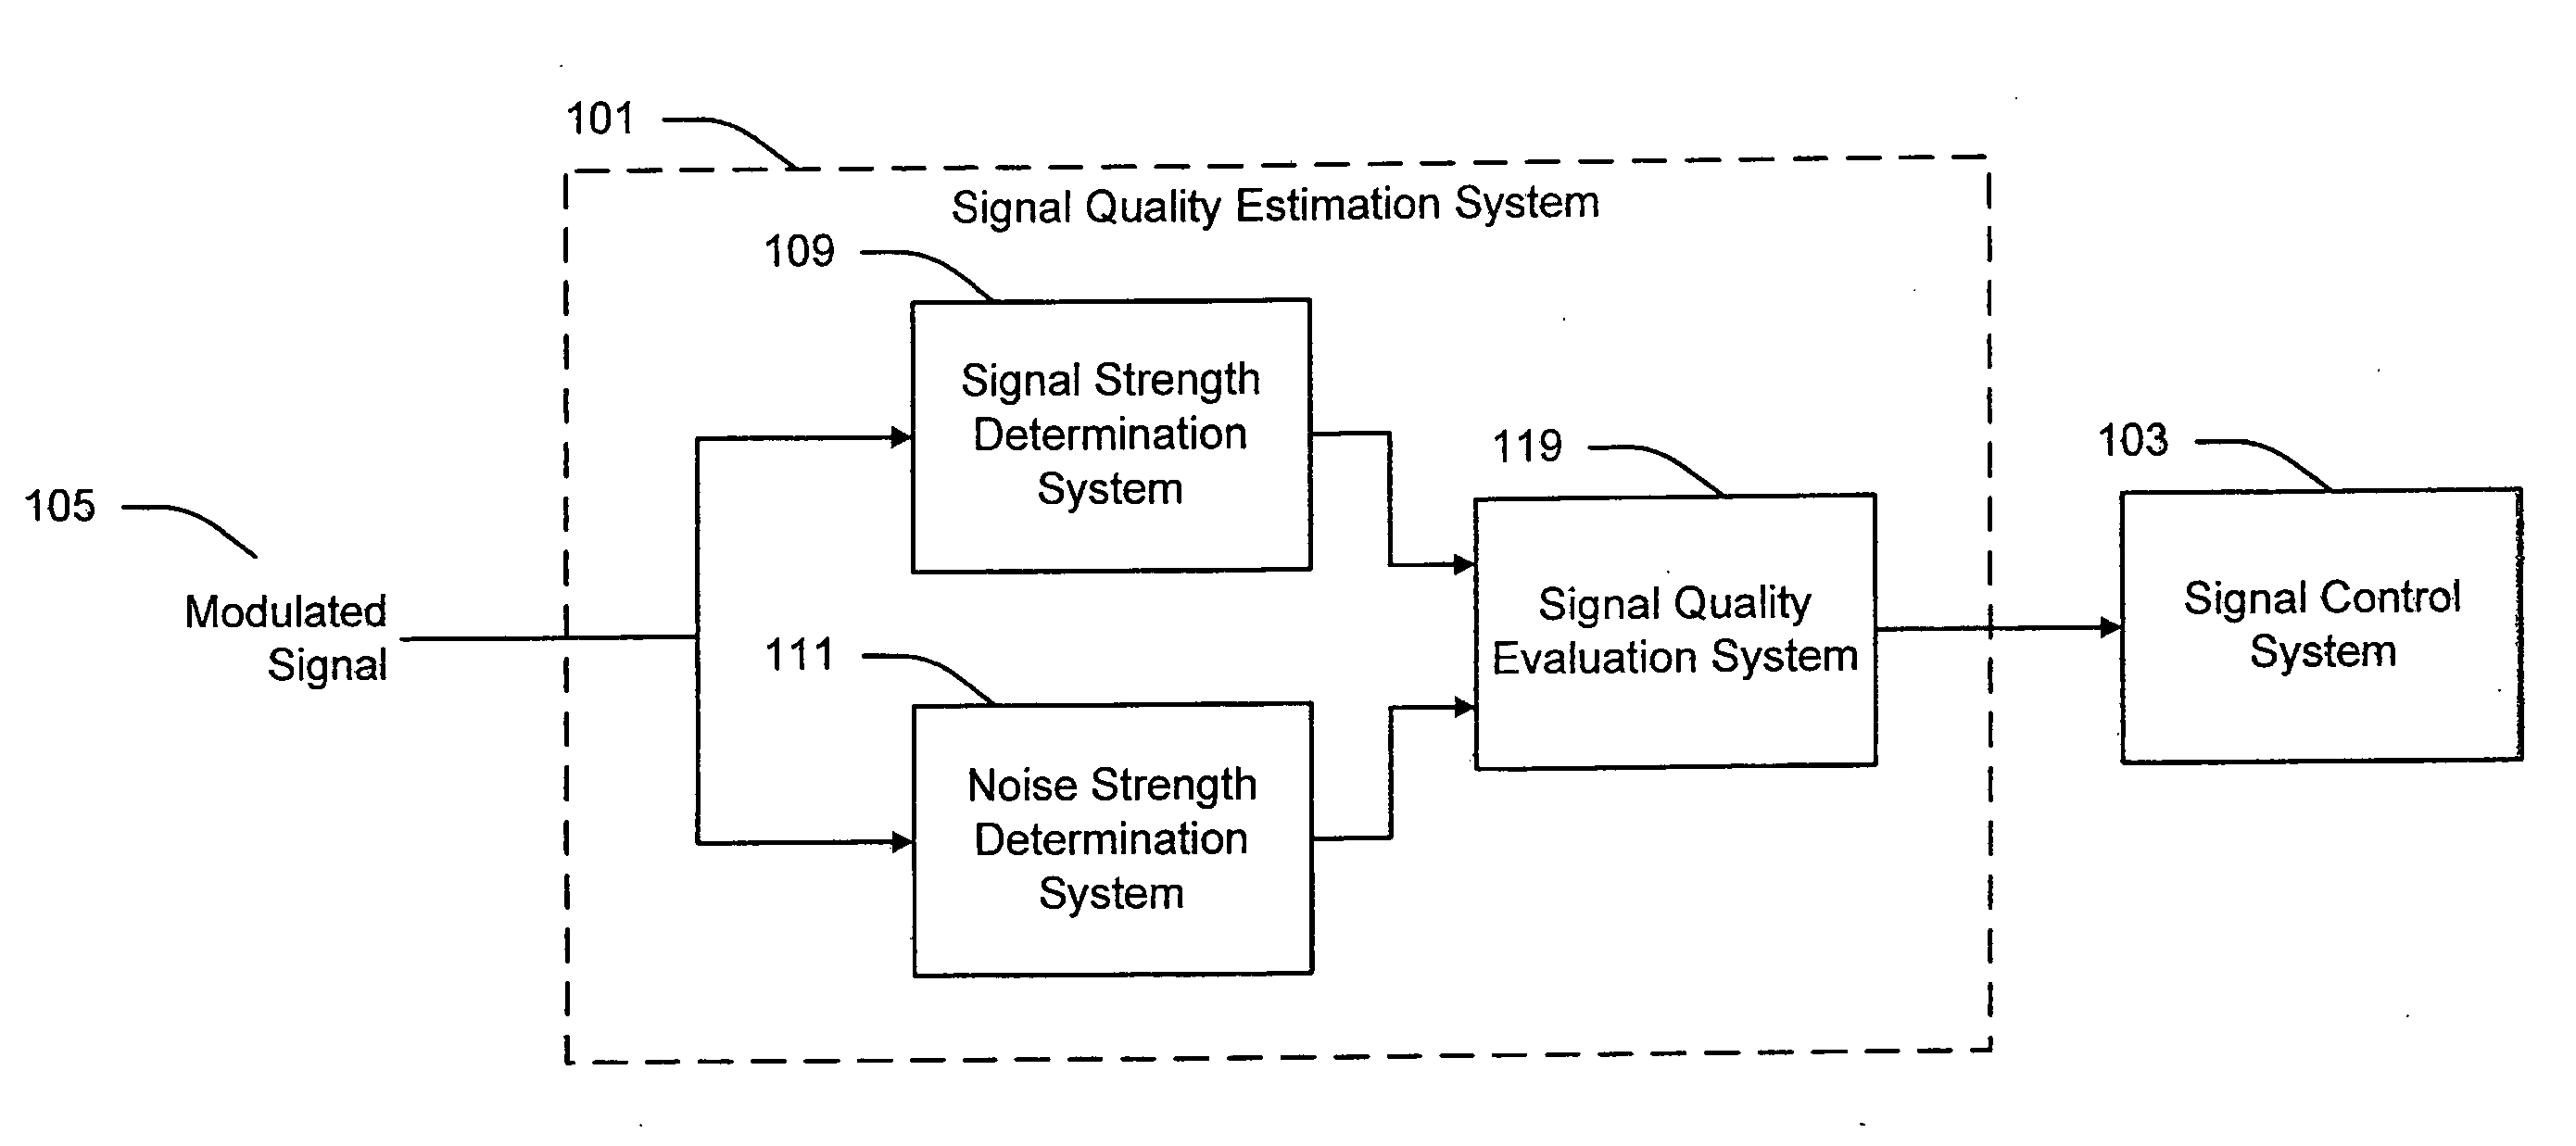 Signal quality estimation and control system